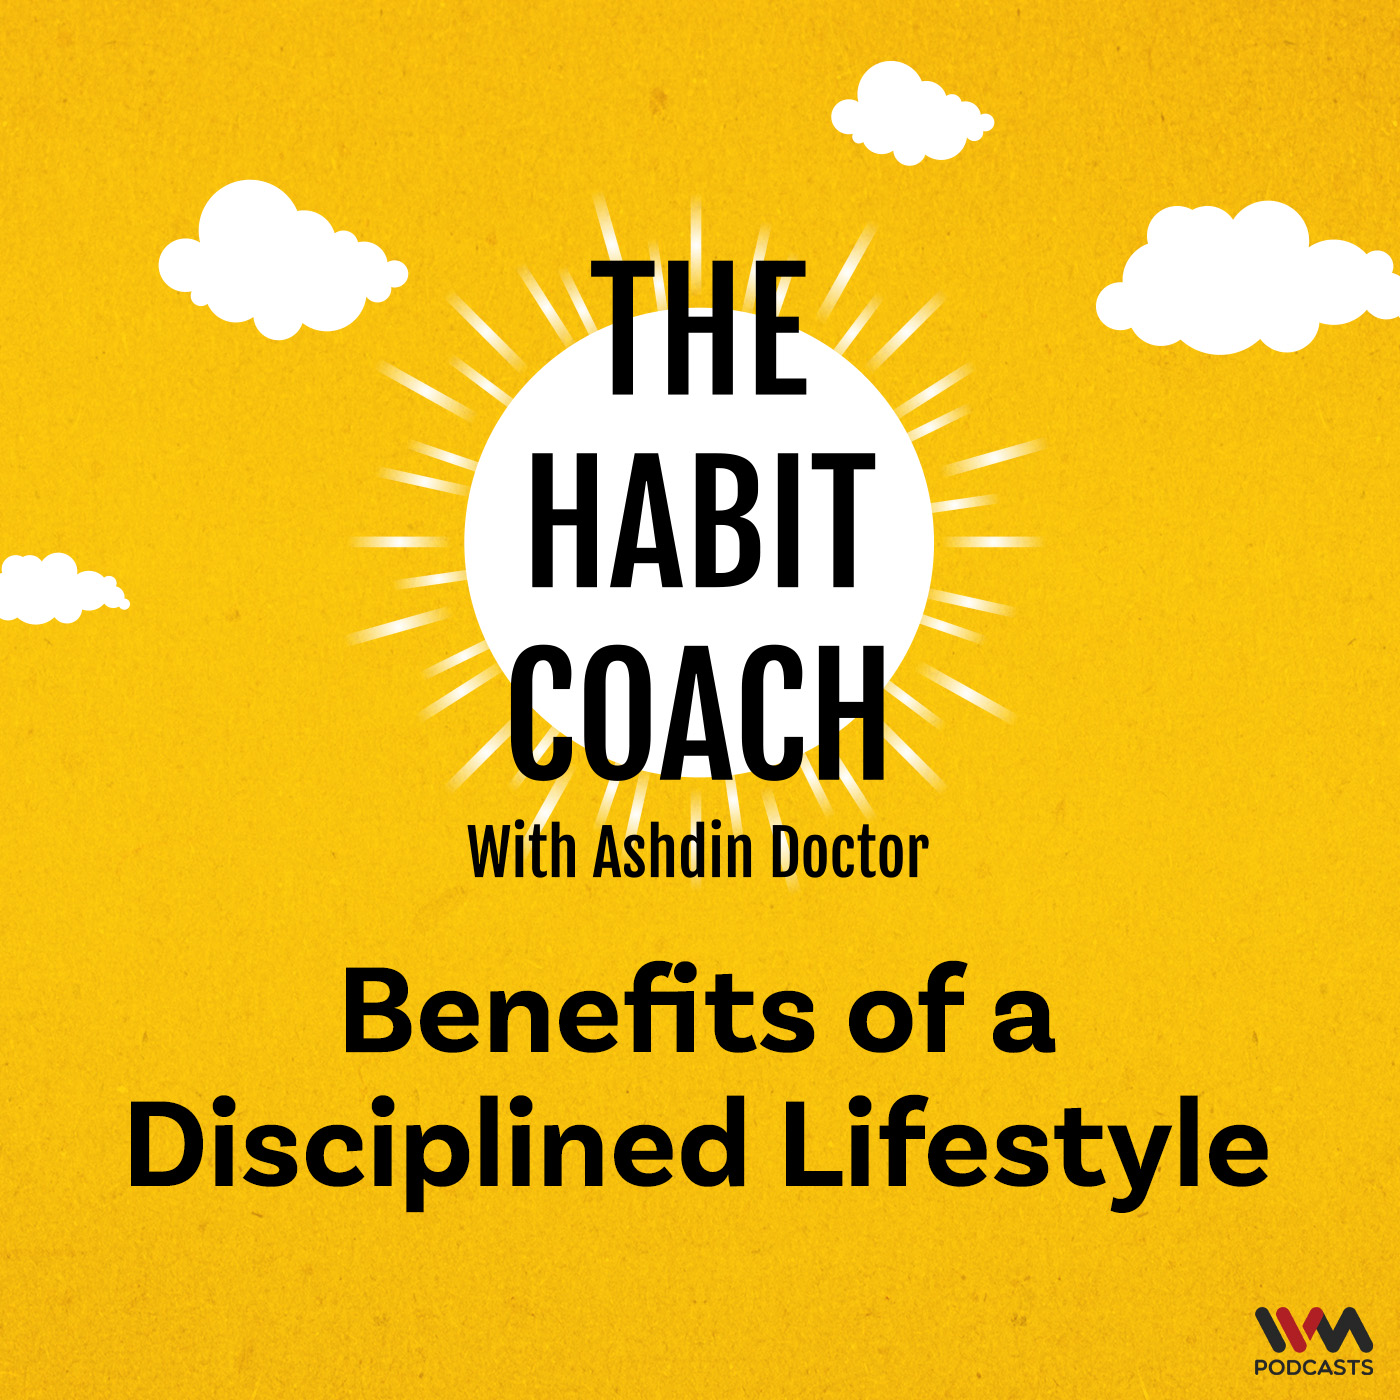 Benefits of a Disciplined Lifestyle